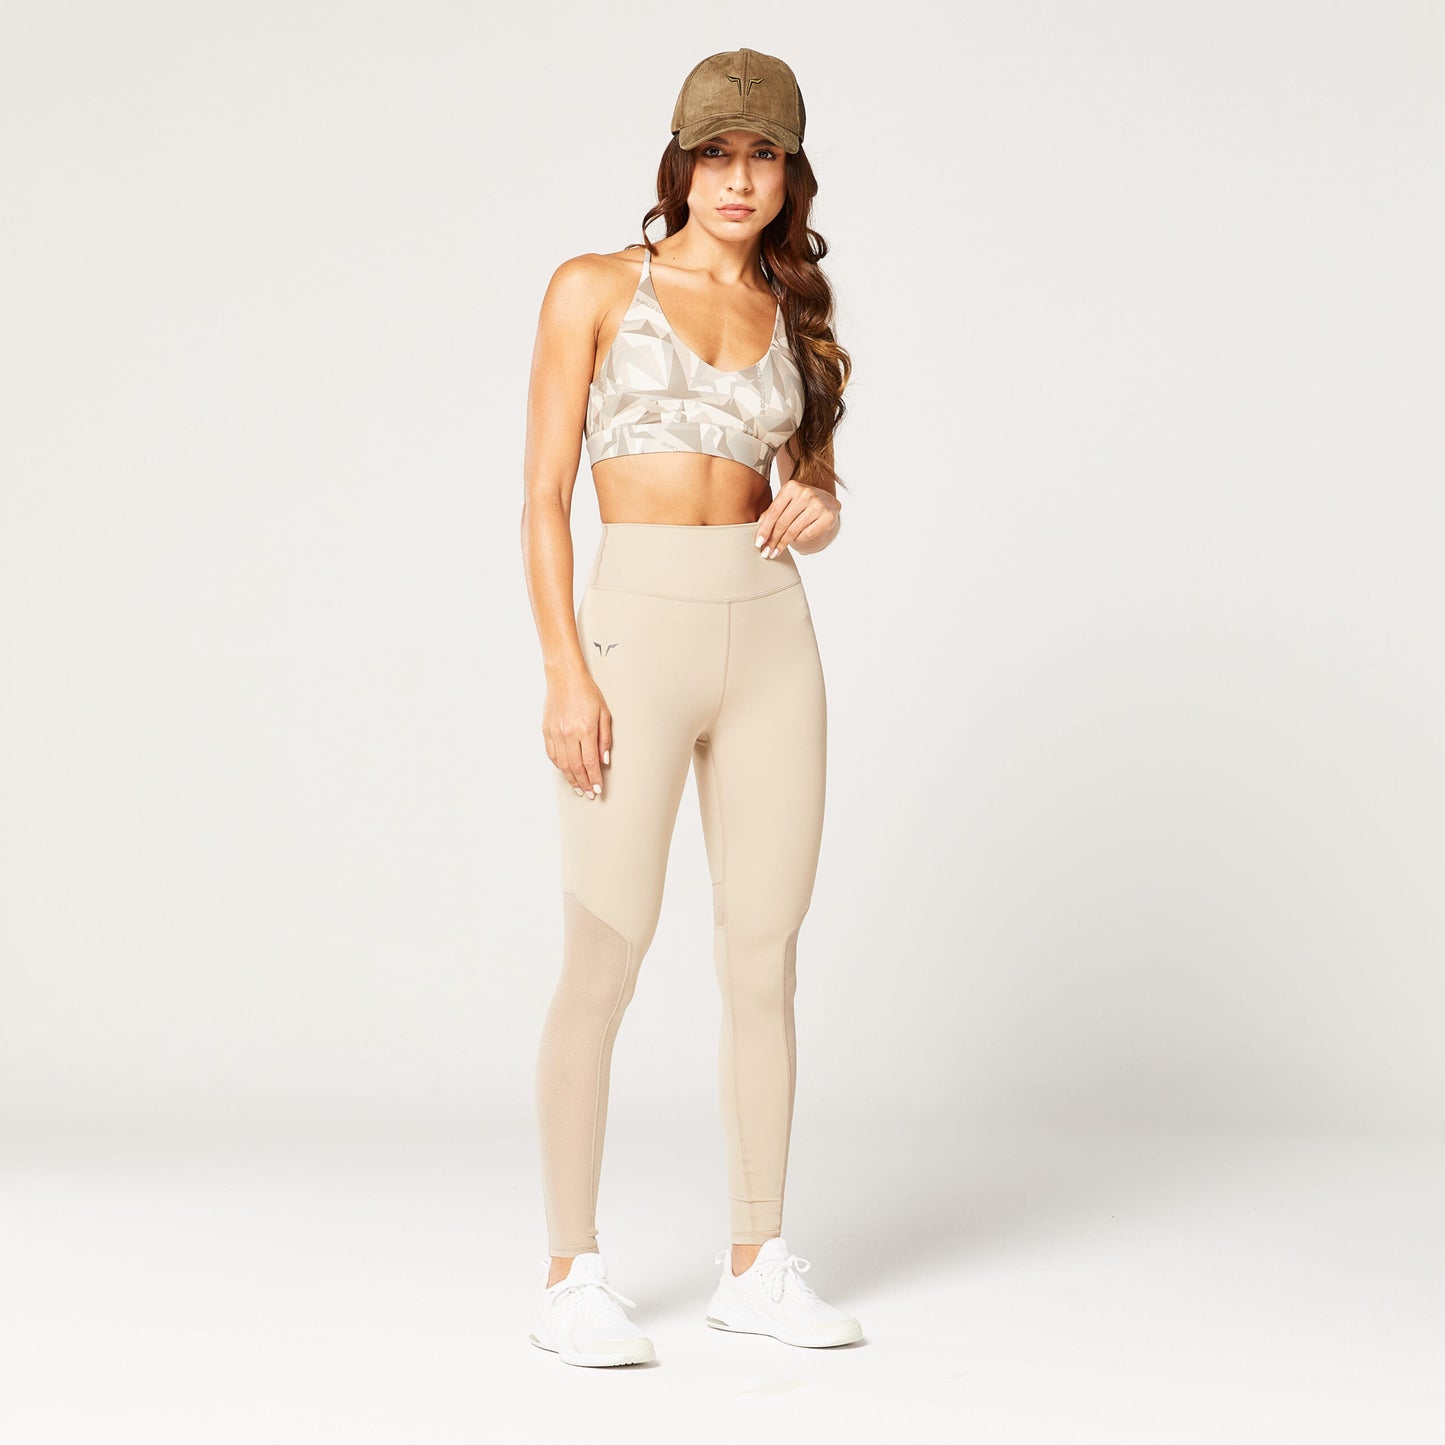 squatwolf-workout-clothes-code-live-in-leggings-cobblestone-gym-leggings-for-women